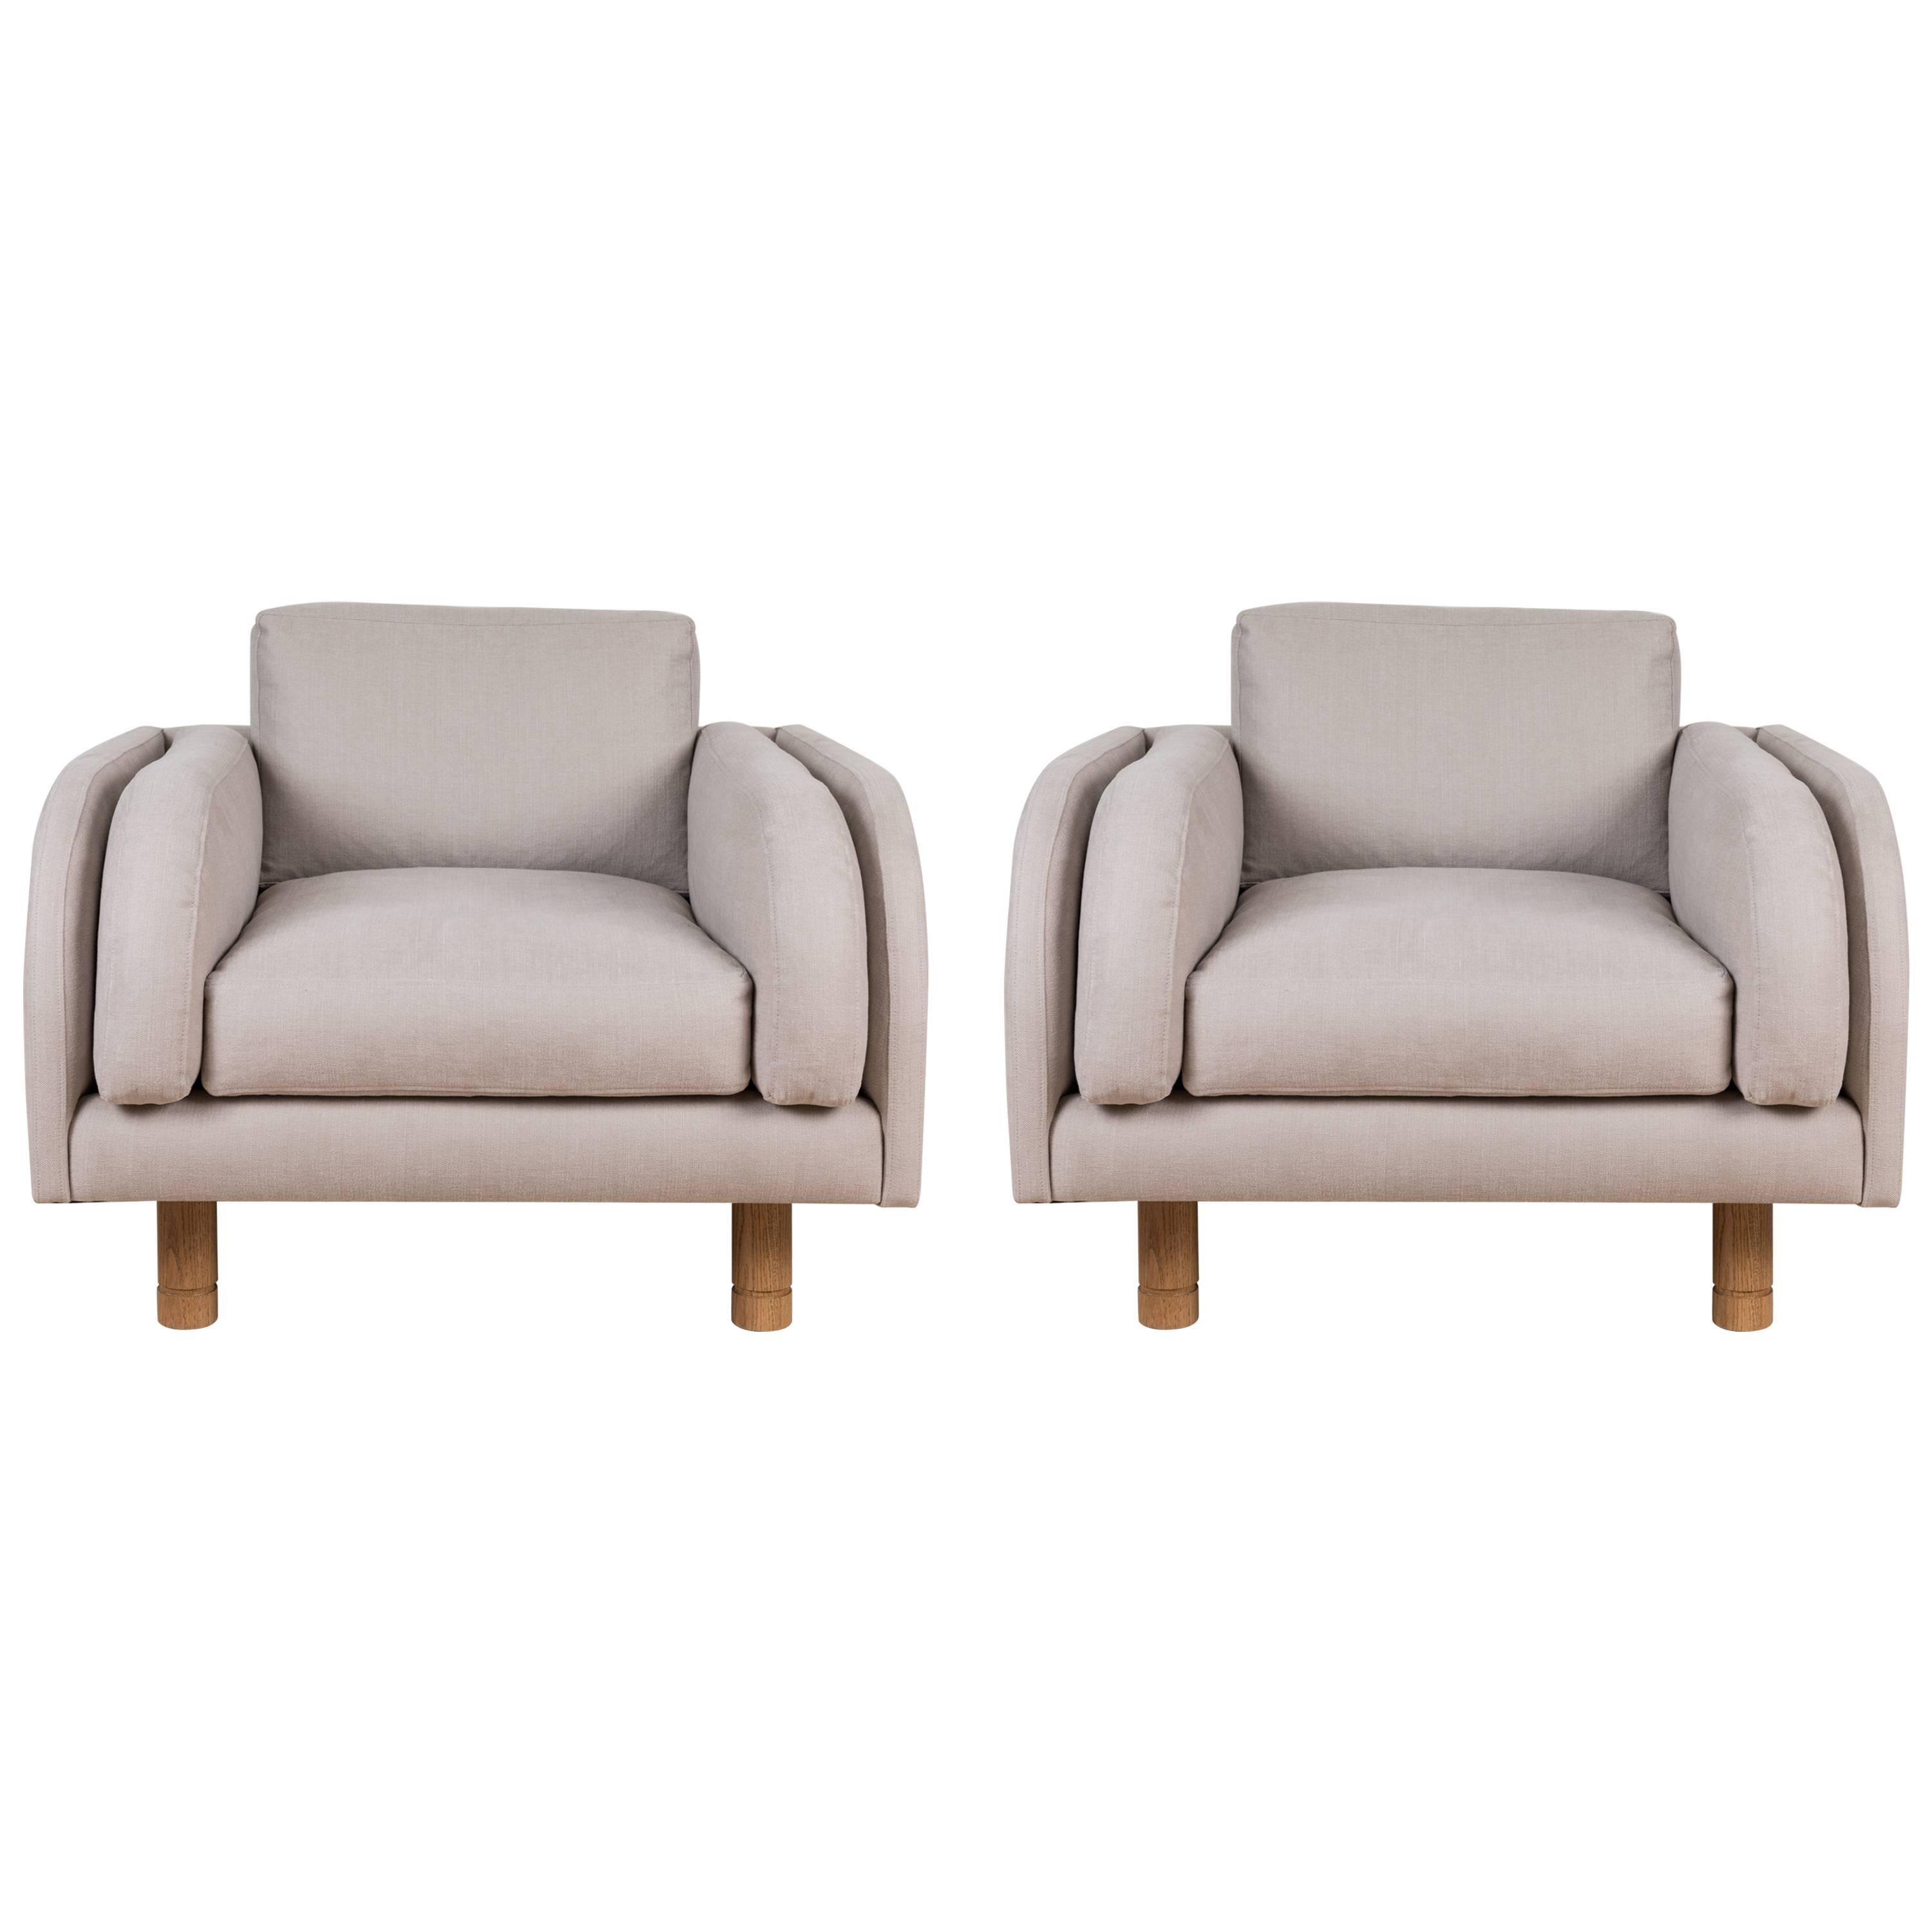 Pair of Moreno Chairs by Lawson-Fenning